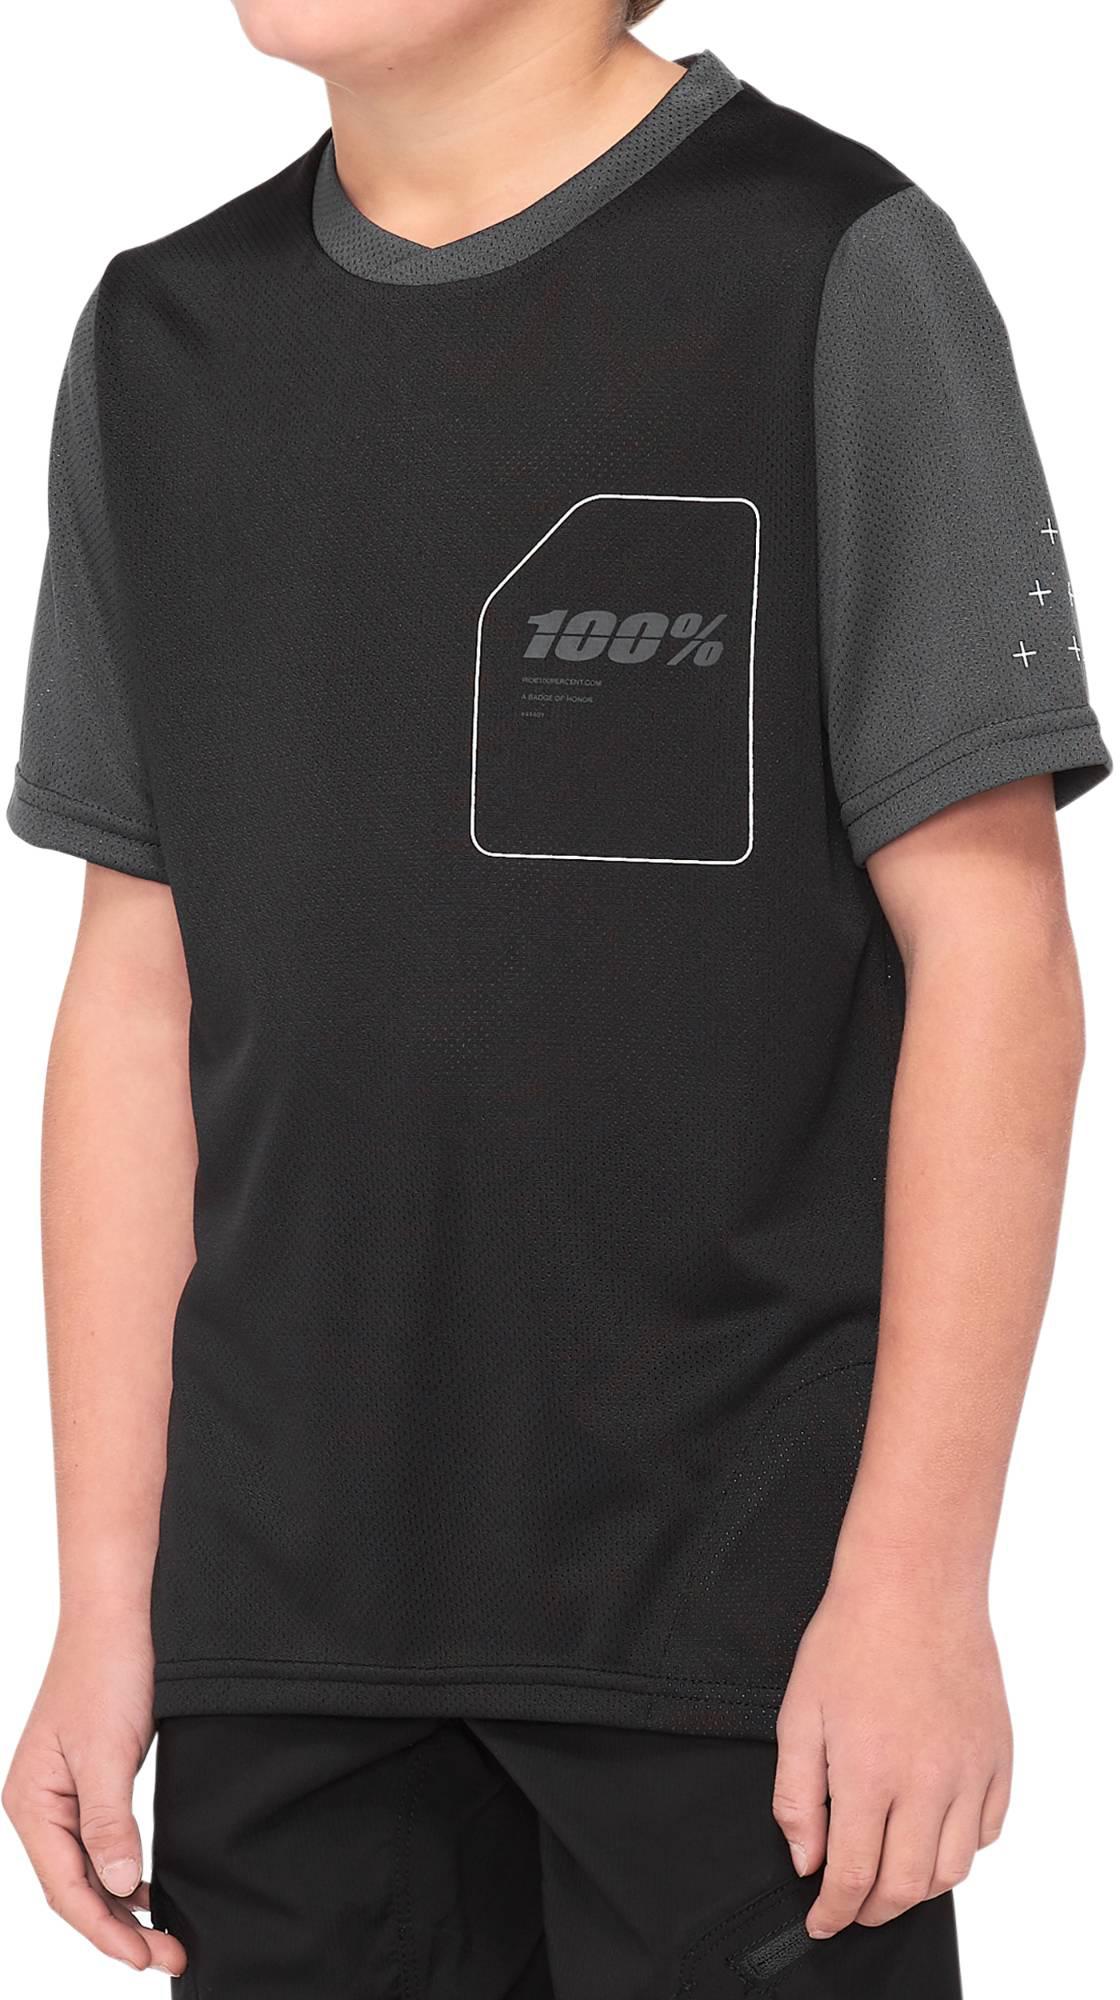 100% Ridecamp Youth Jersey Ss20  Black/grey